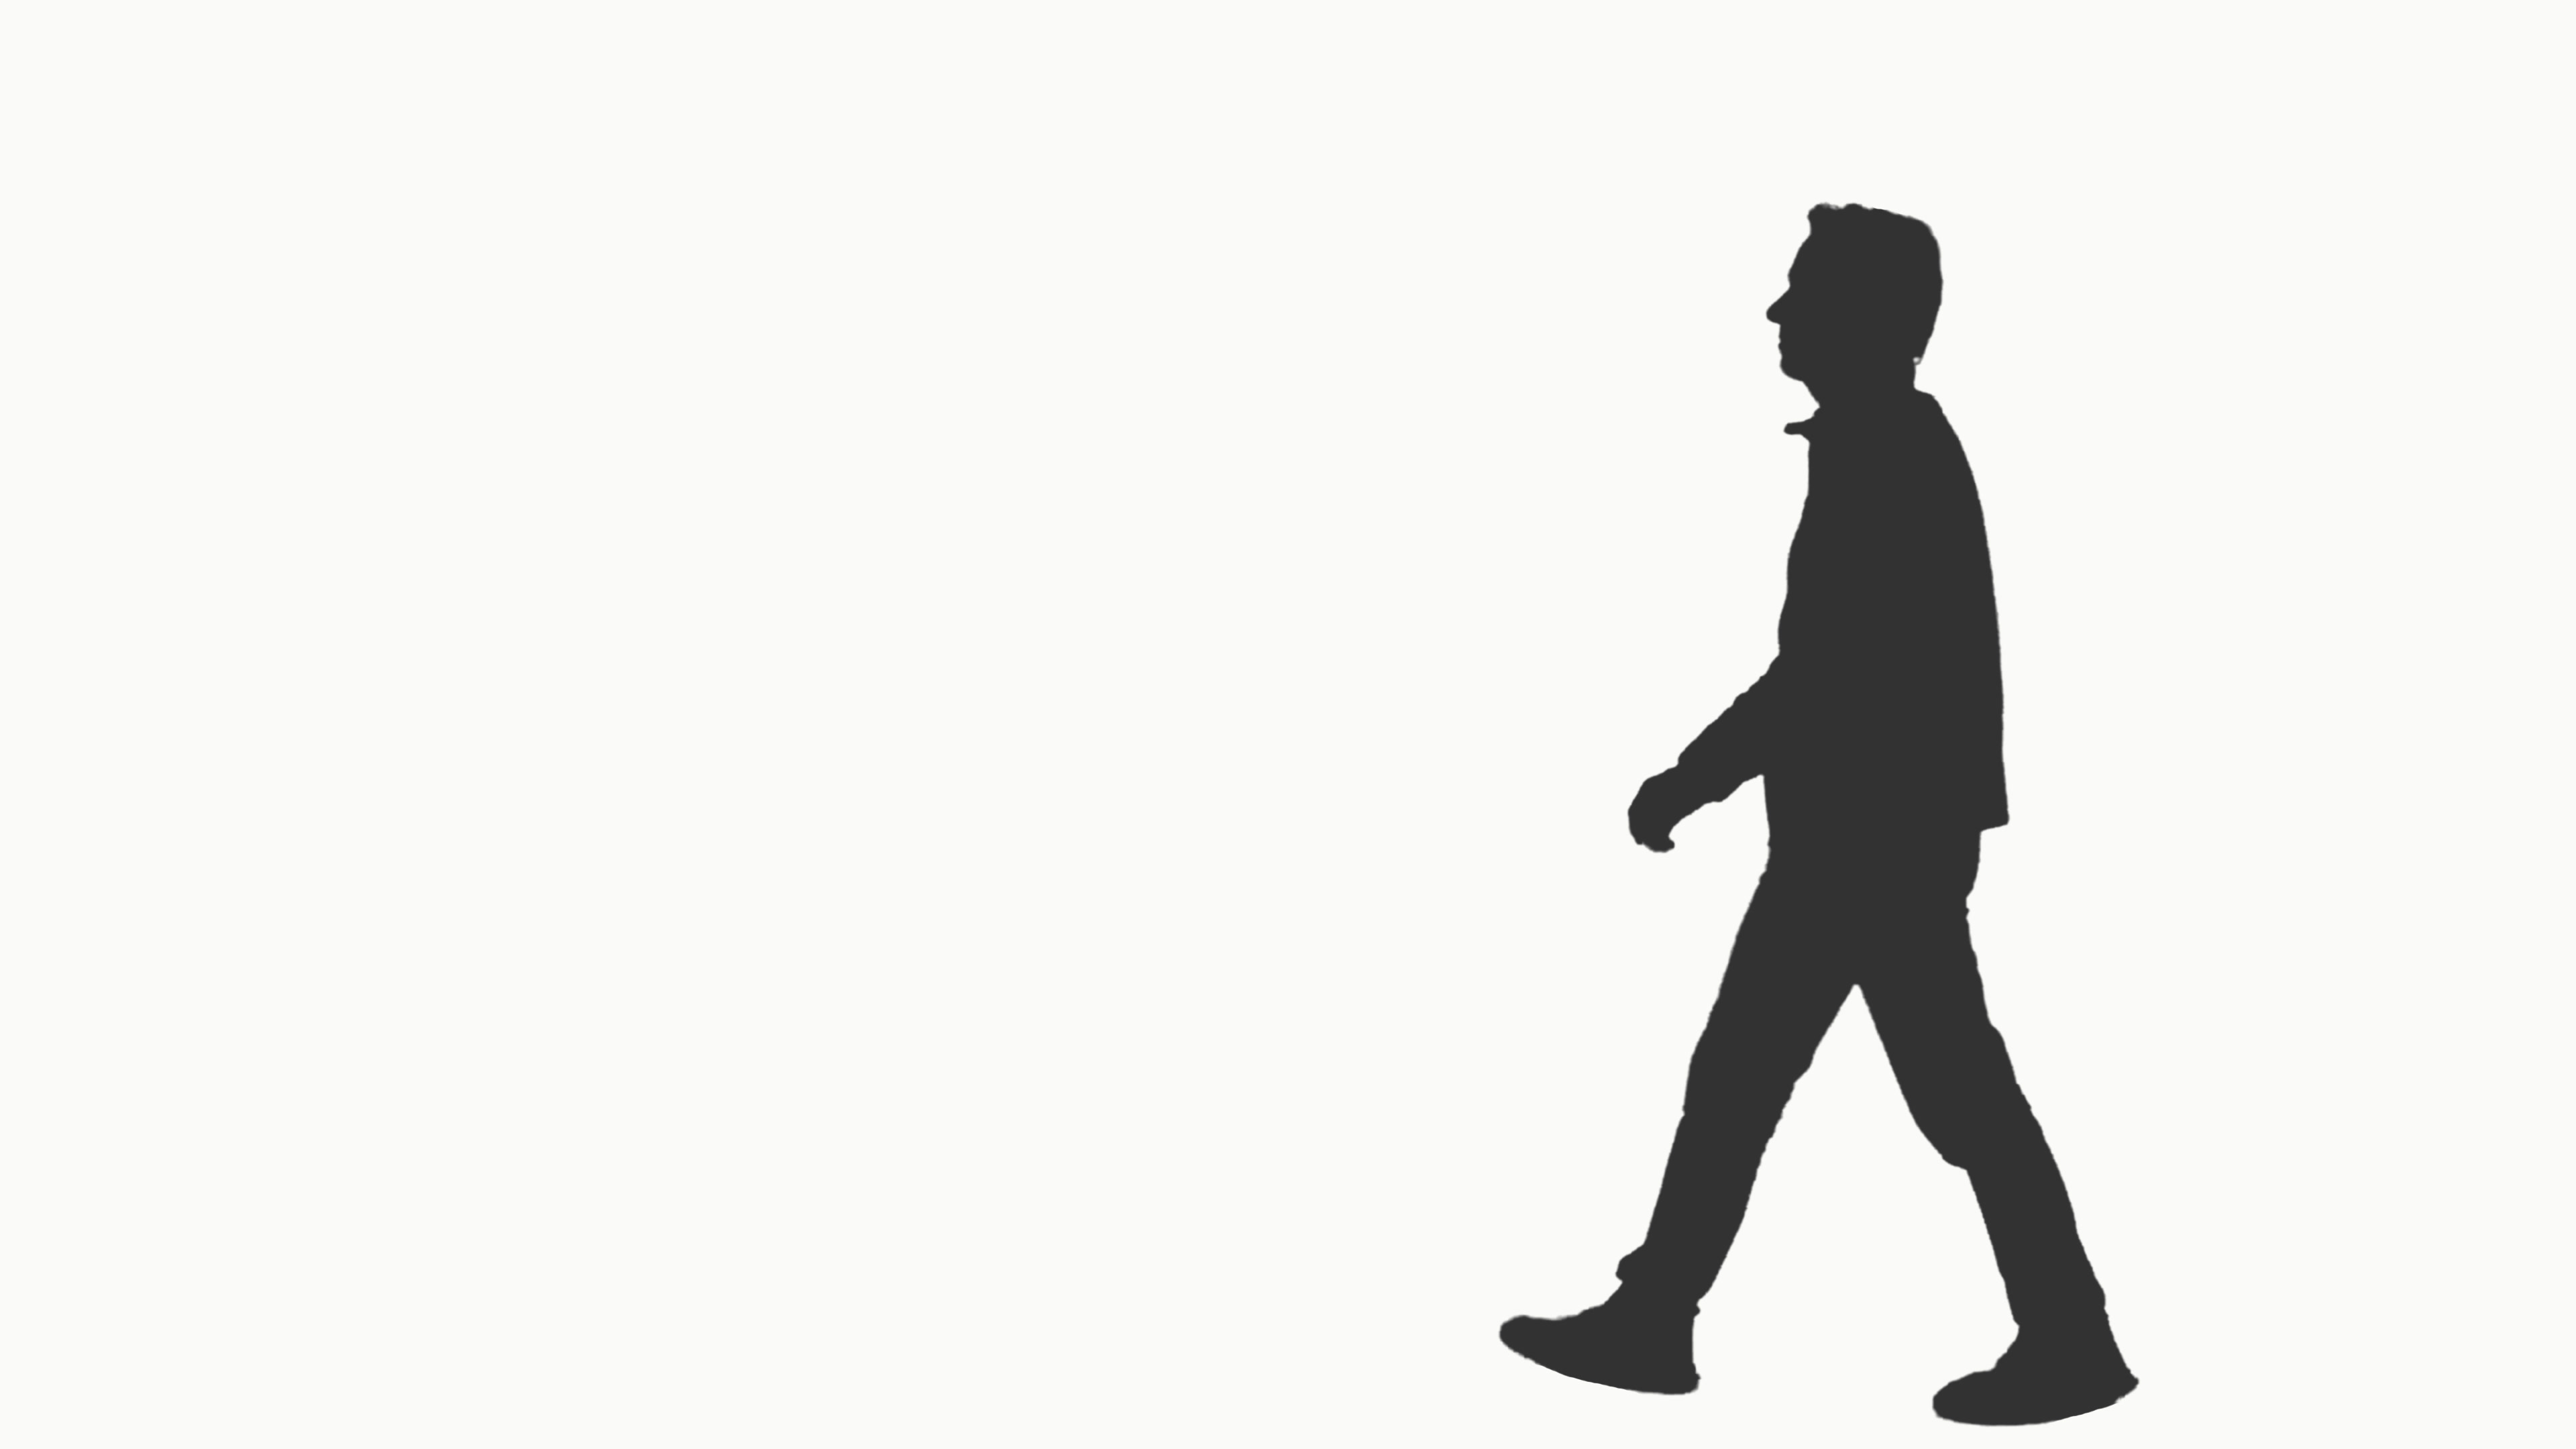 Human Silhouette Walking at GetDrawings.com | Free for personal use ...